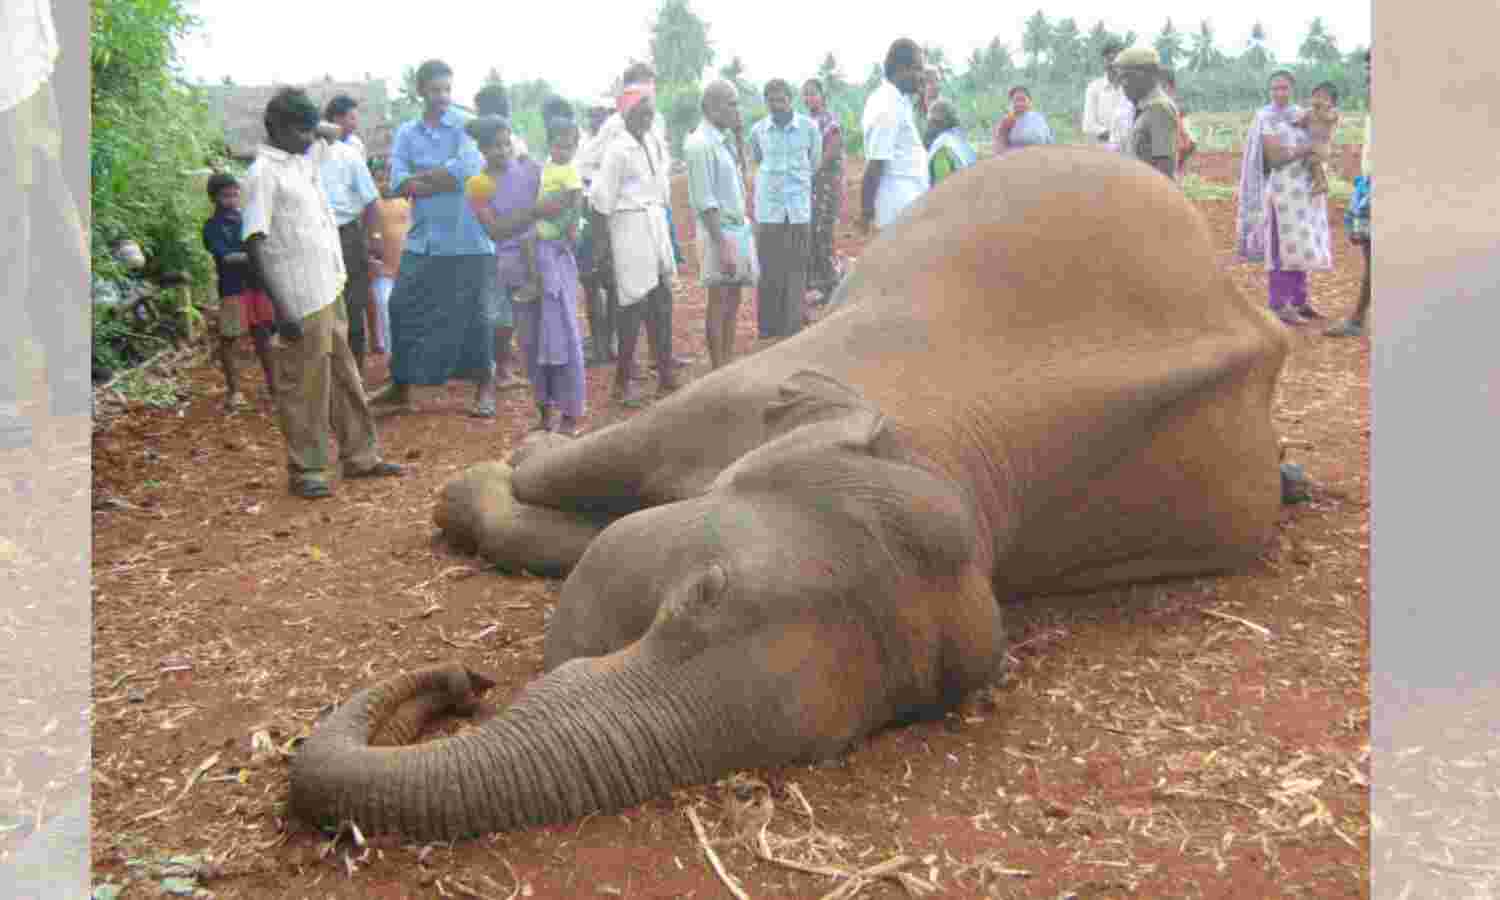 As Living Room Runs Out In India, The Slaughter Of Its Elephants Escalates